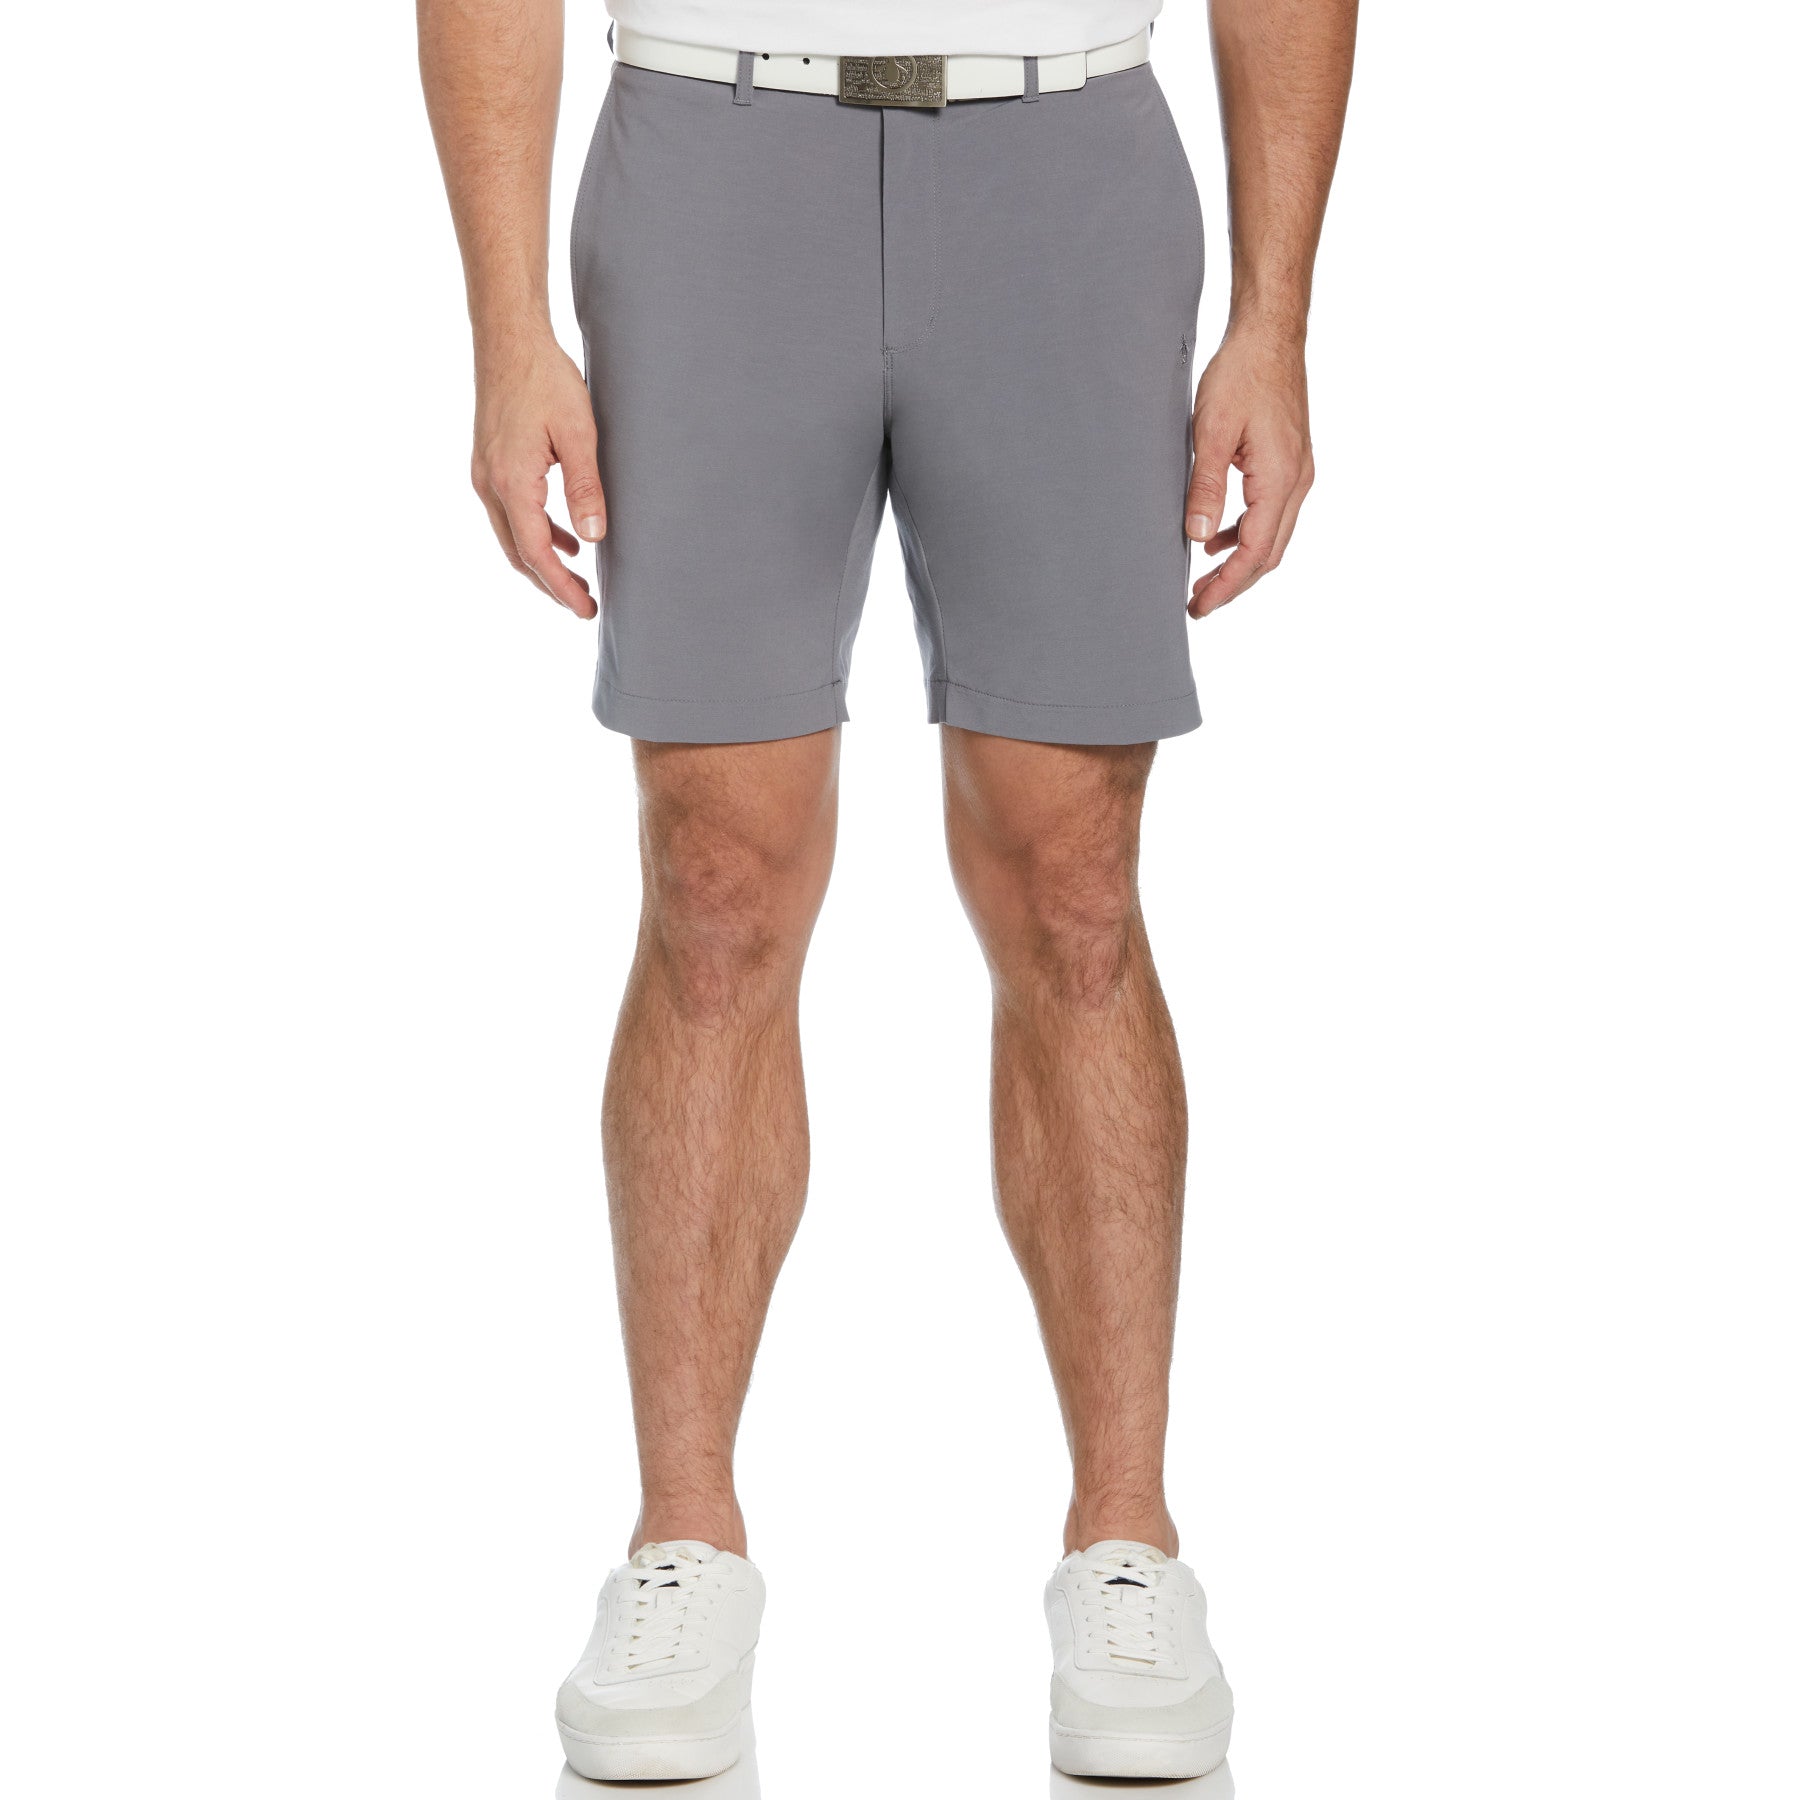 View Pete Performance Golf Short In Quiet Shade information